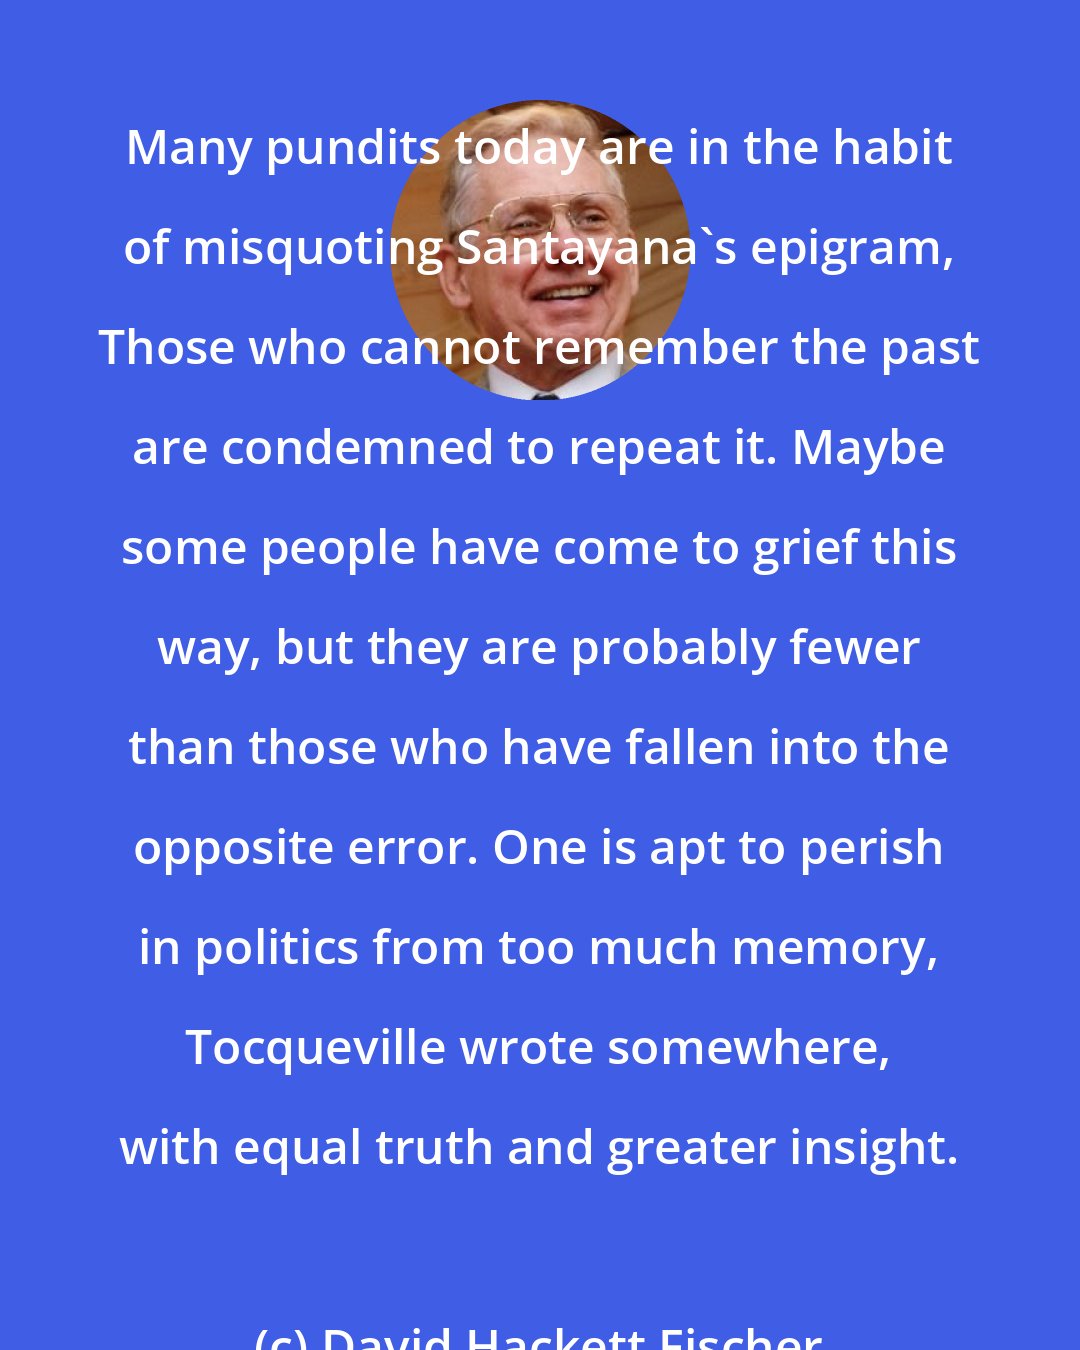 David Hackett Fischer: Many pundits today are in the habit of misquoting Santayana's epigram, Those who cannot remember the past are condemned to repeat it. Maybe some people have come to grief this way, but they are probably fewer than those who have fallen into the opposite error. One is apt to perish in politics from too much memory, Tocqueville wrote somewhere, with equal truth and greater insight.